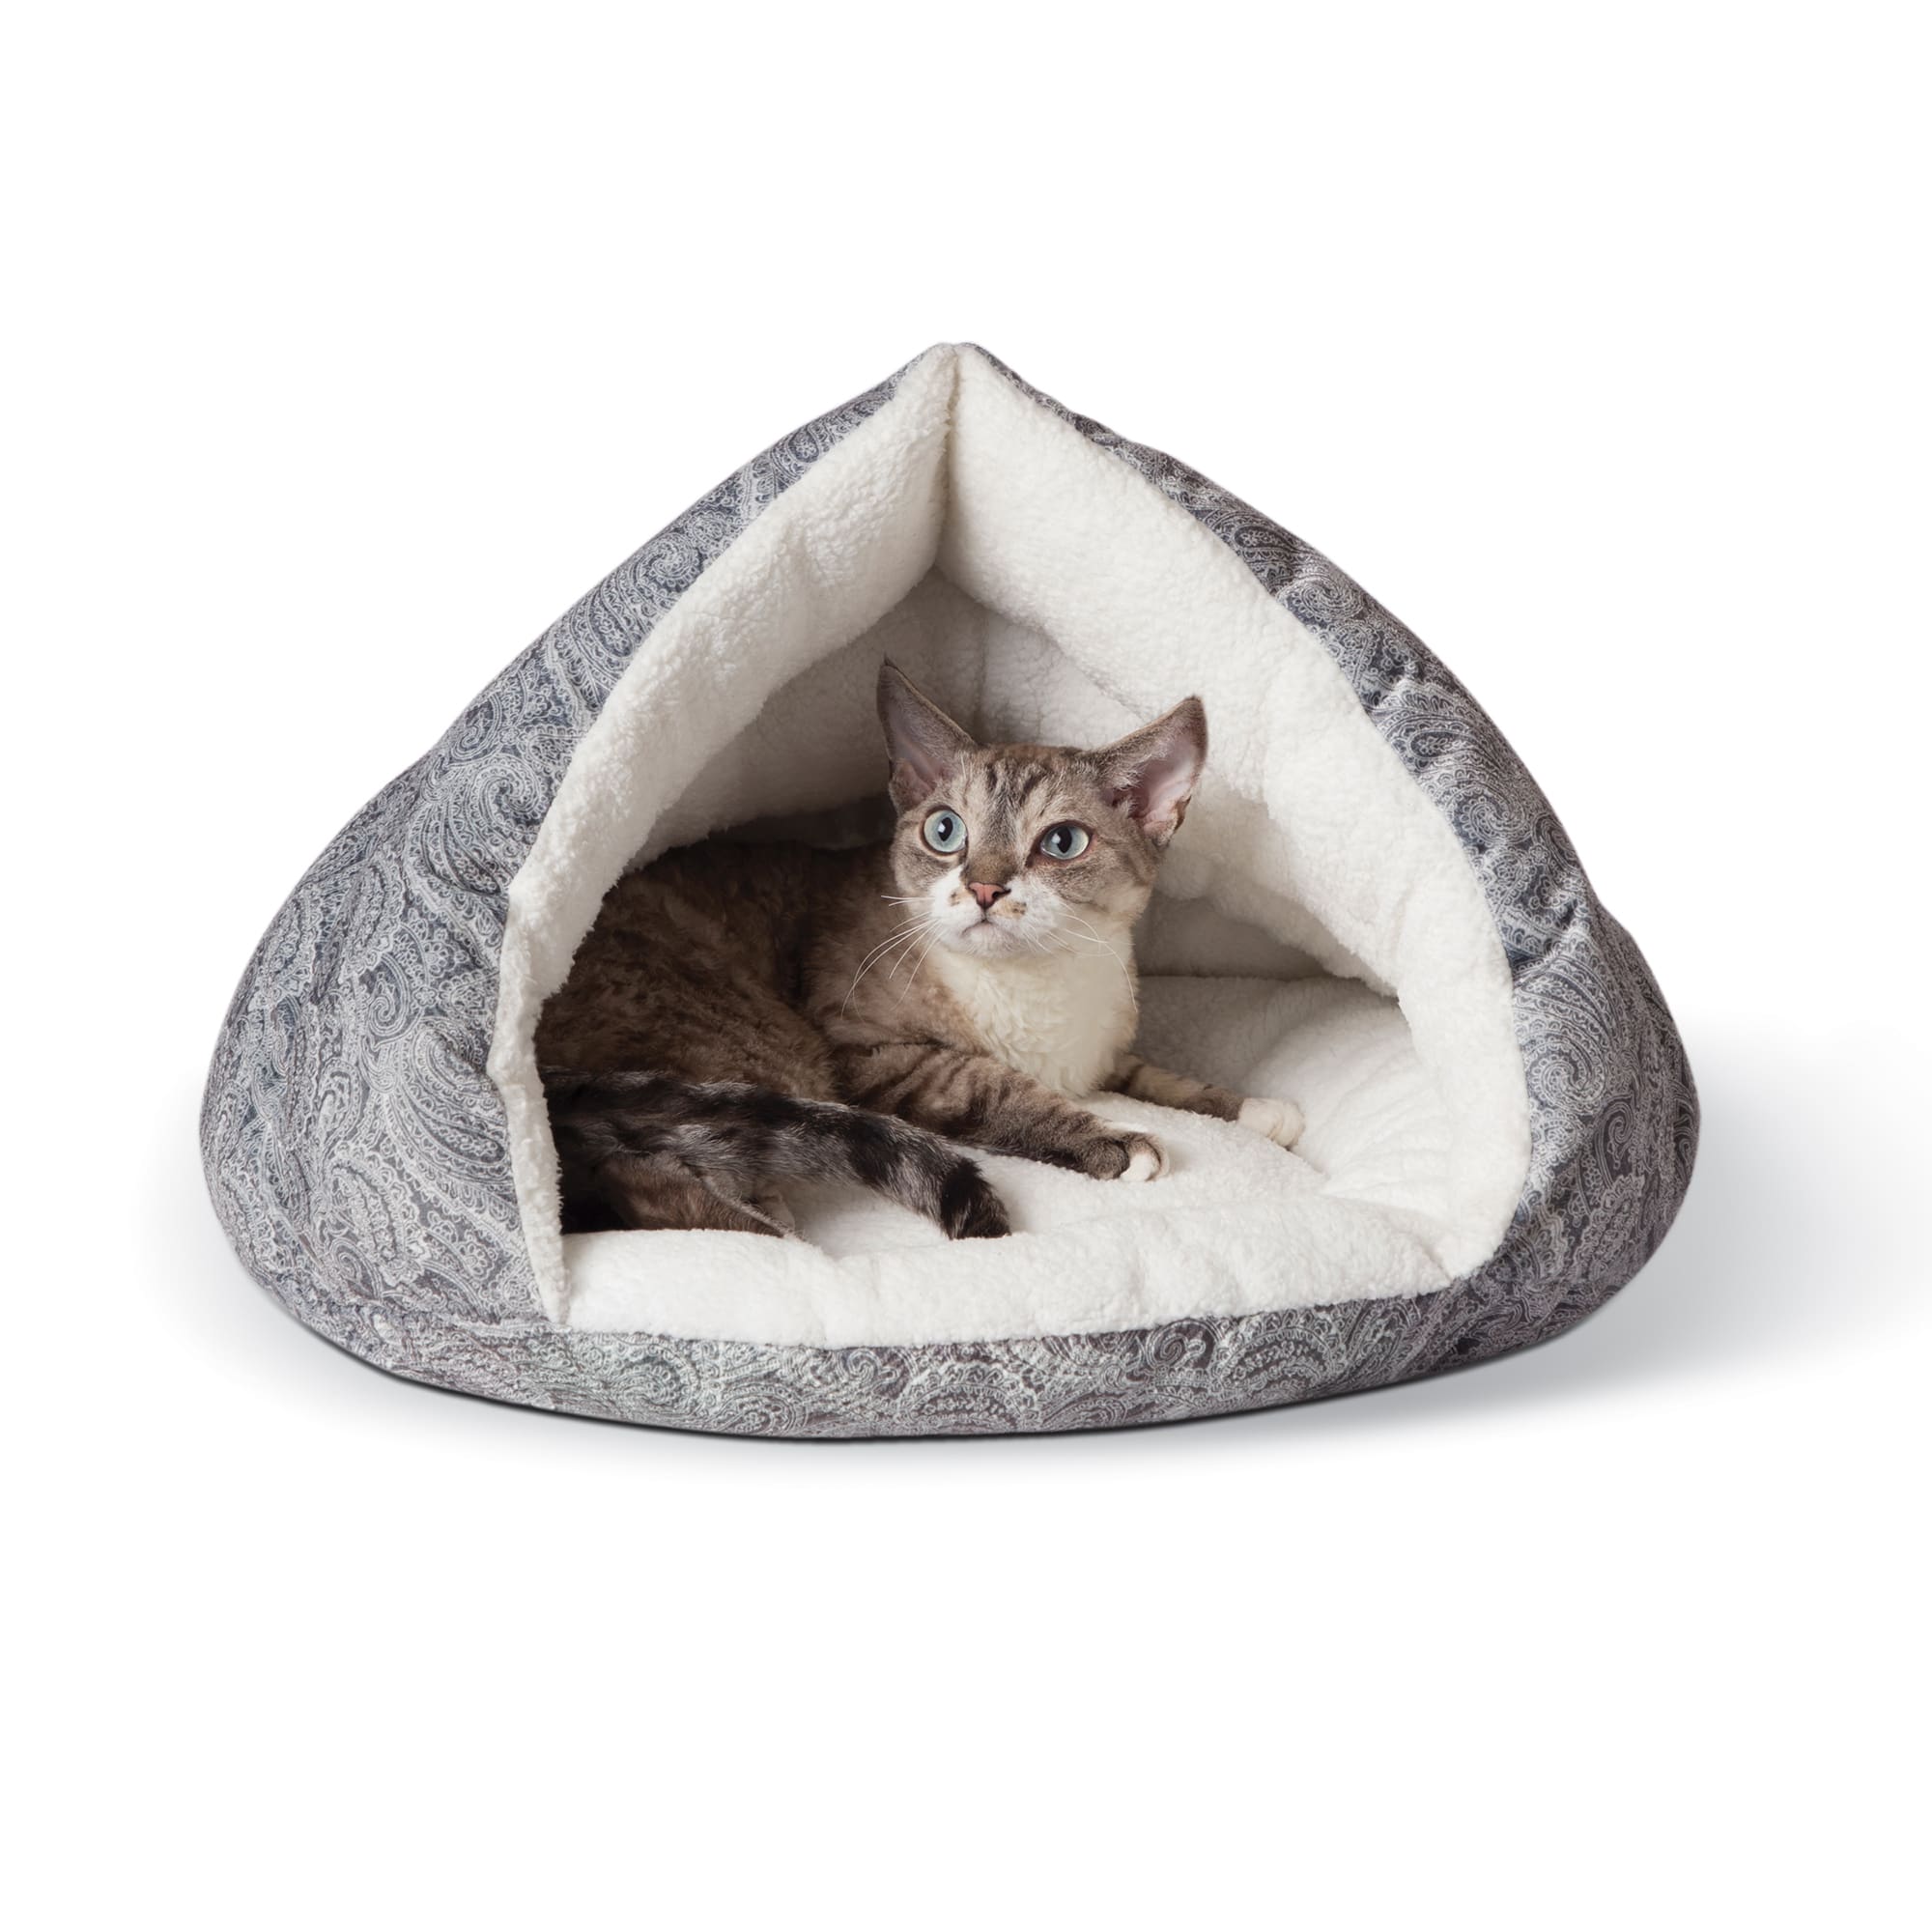 The Warming Heated Large Cat/Small Dog Pet Bed w/Hood Round 20" Diameter 